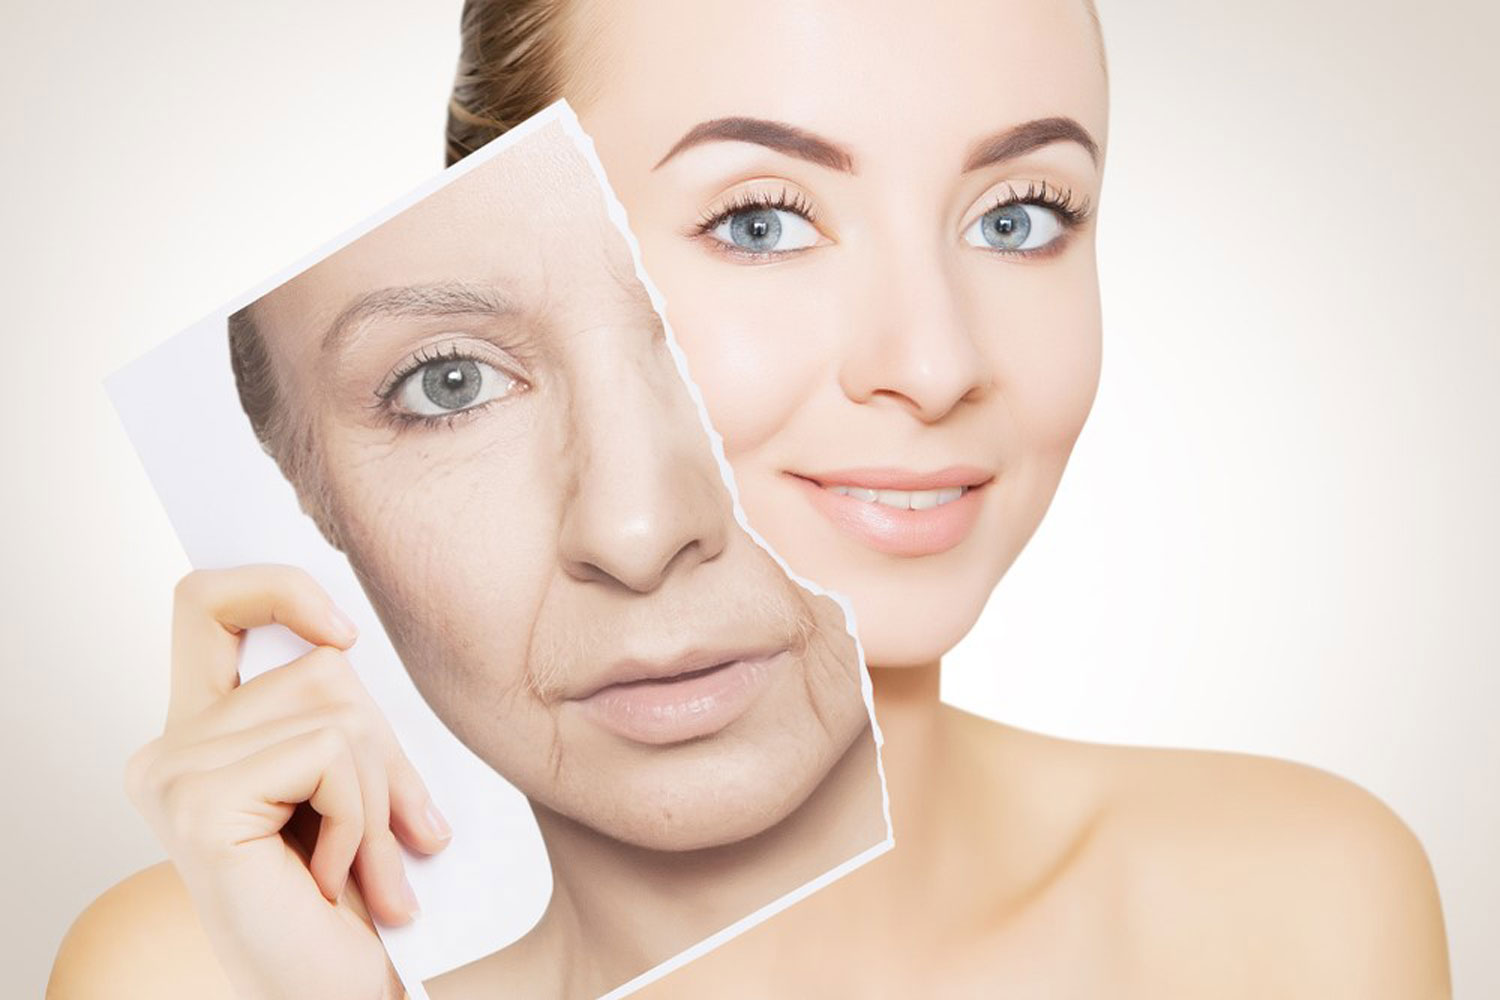 Anti-Aging Products Services and Devices Market